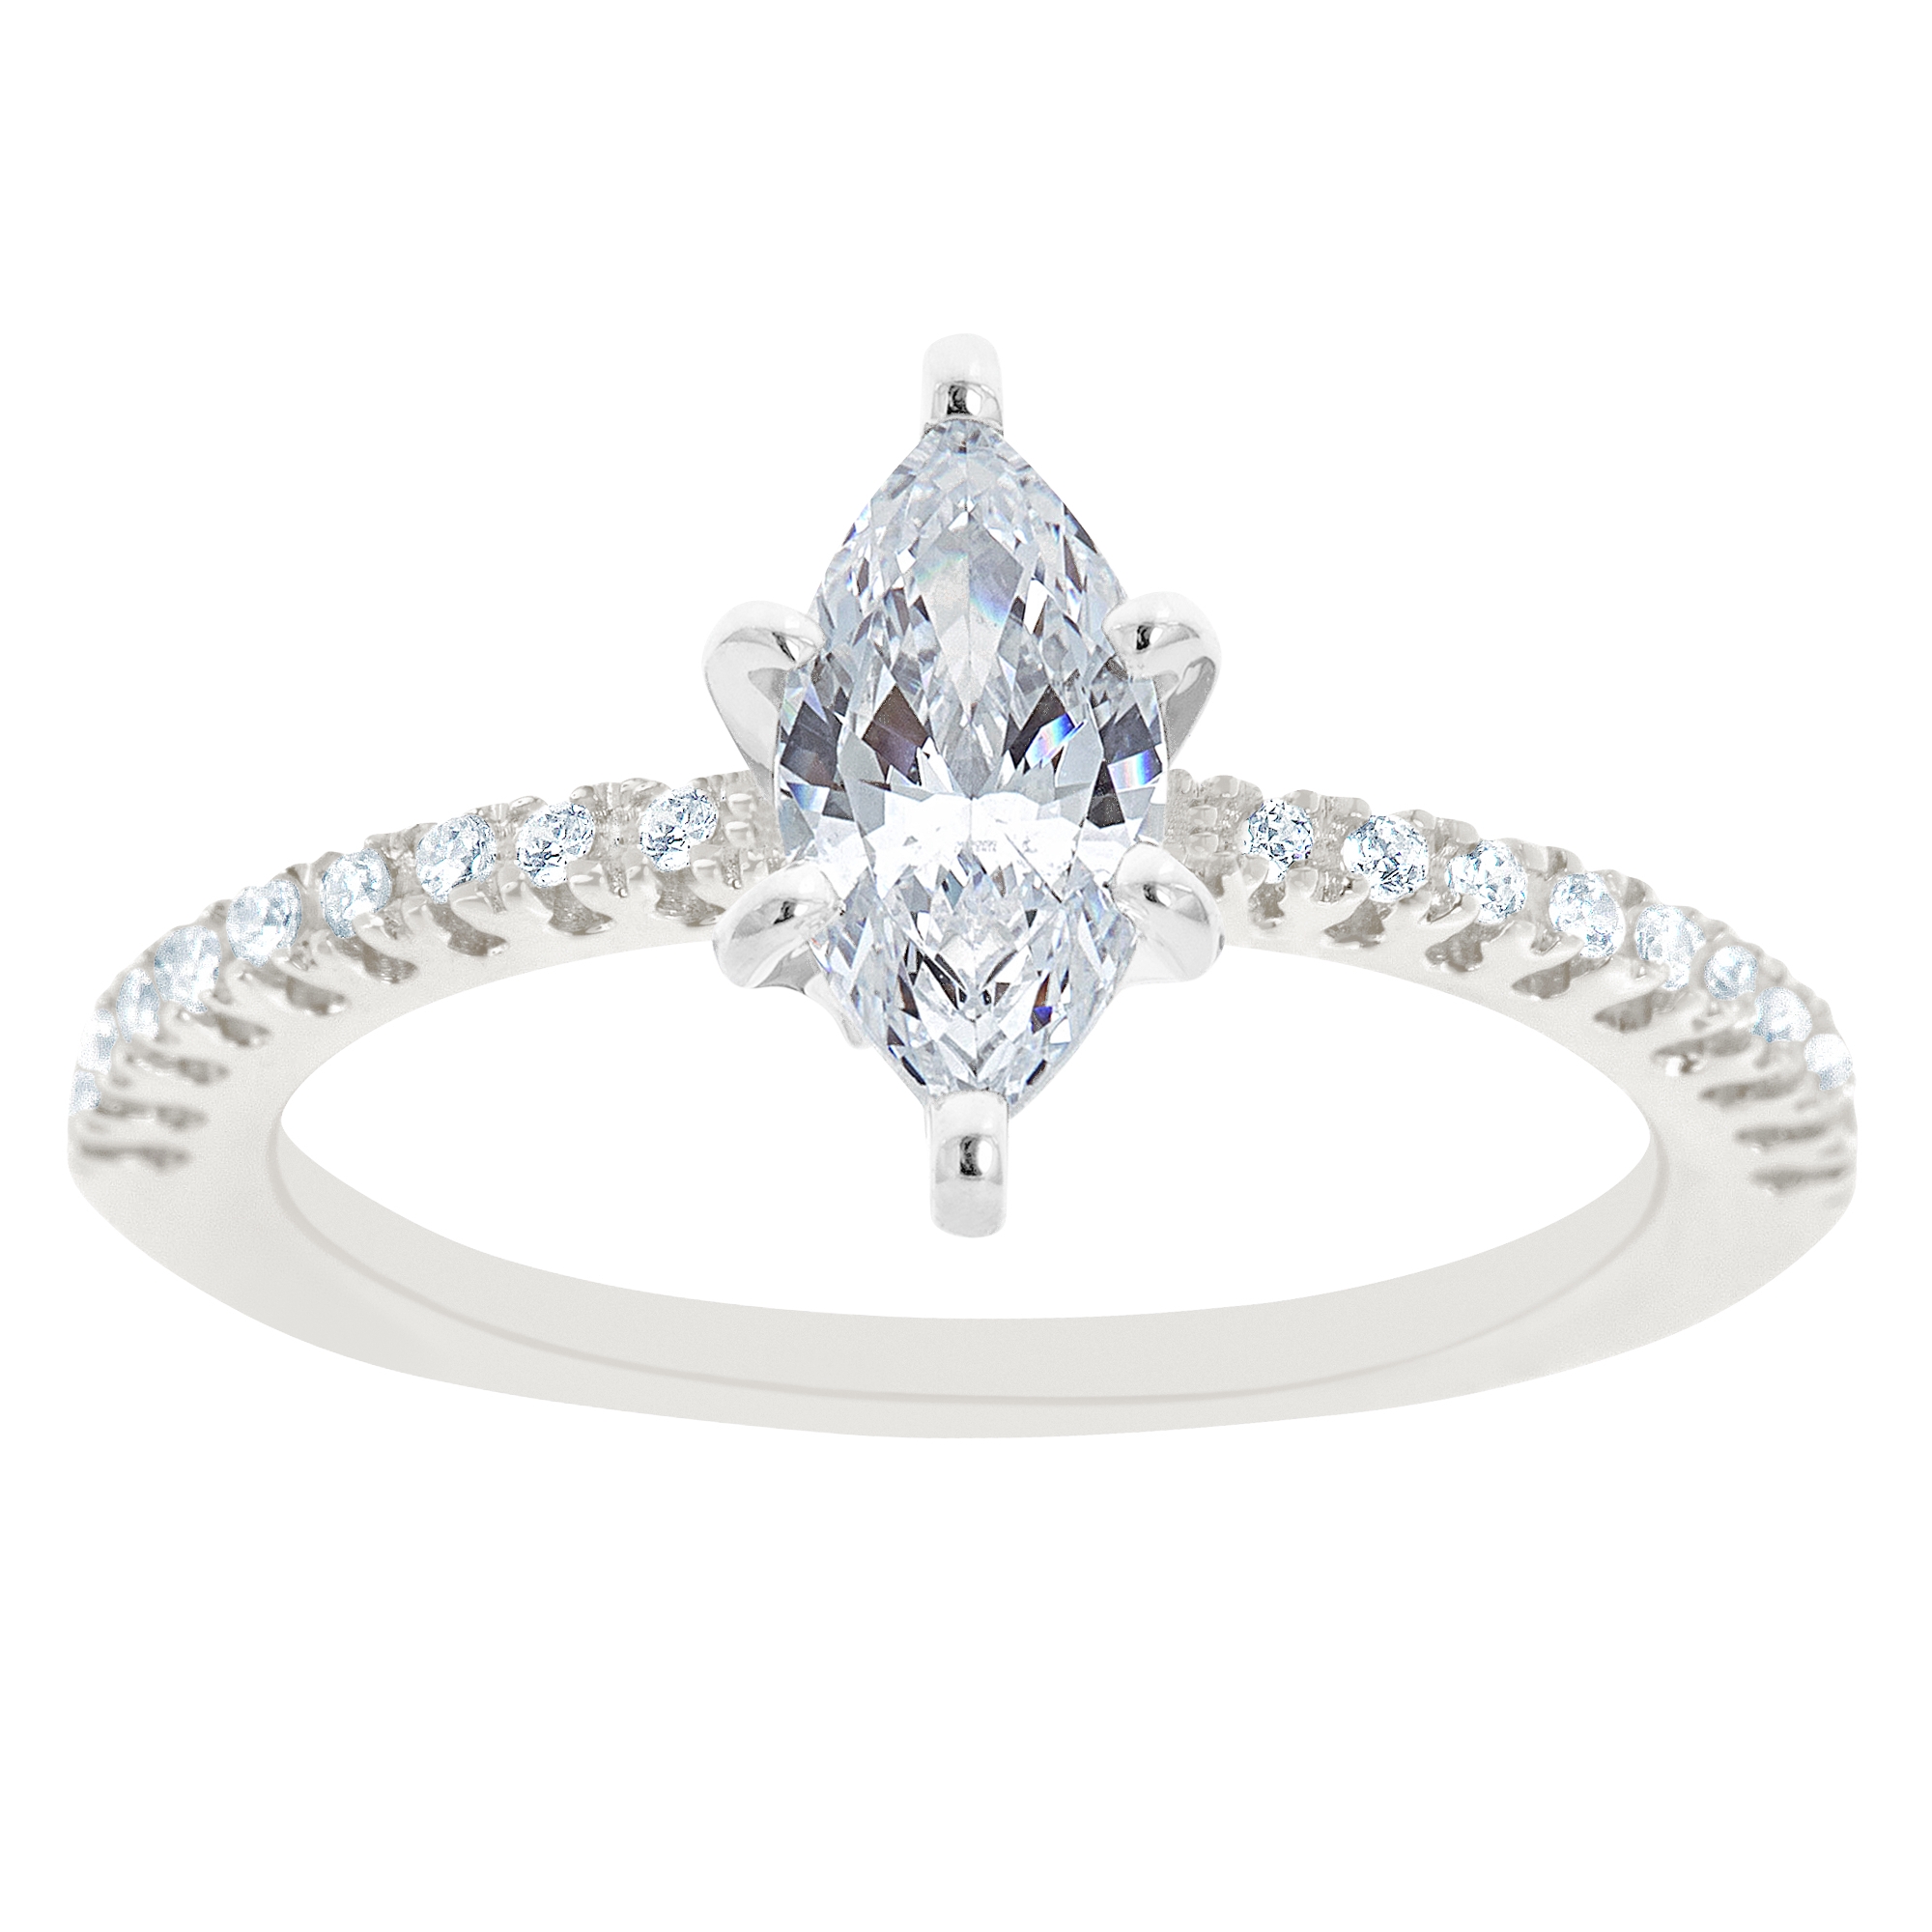 New York City Diamond District 14K White Gold Marquise Certified Diamond Engagement Ring